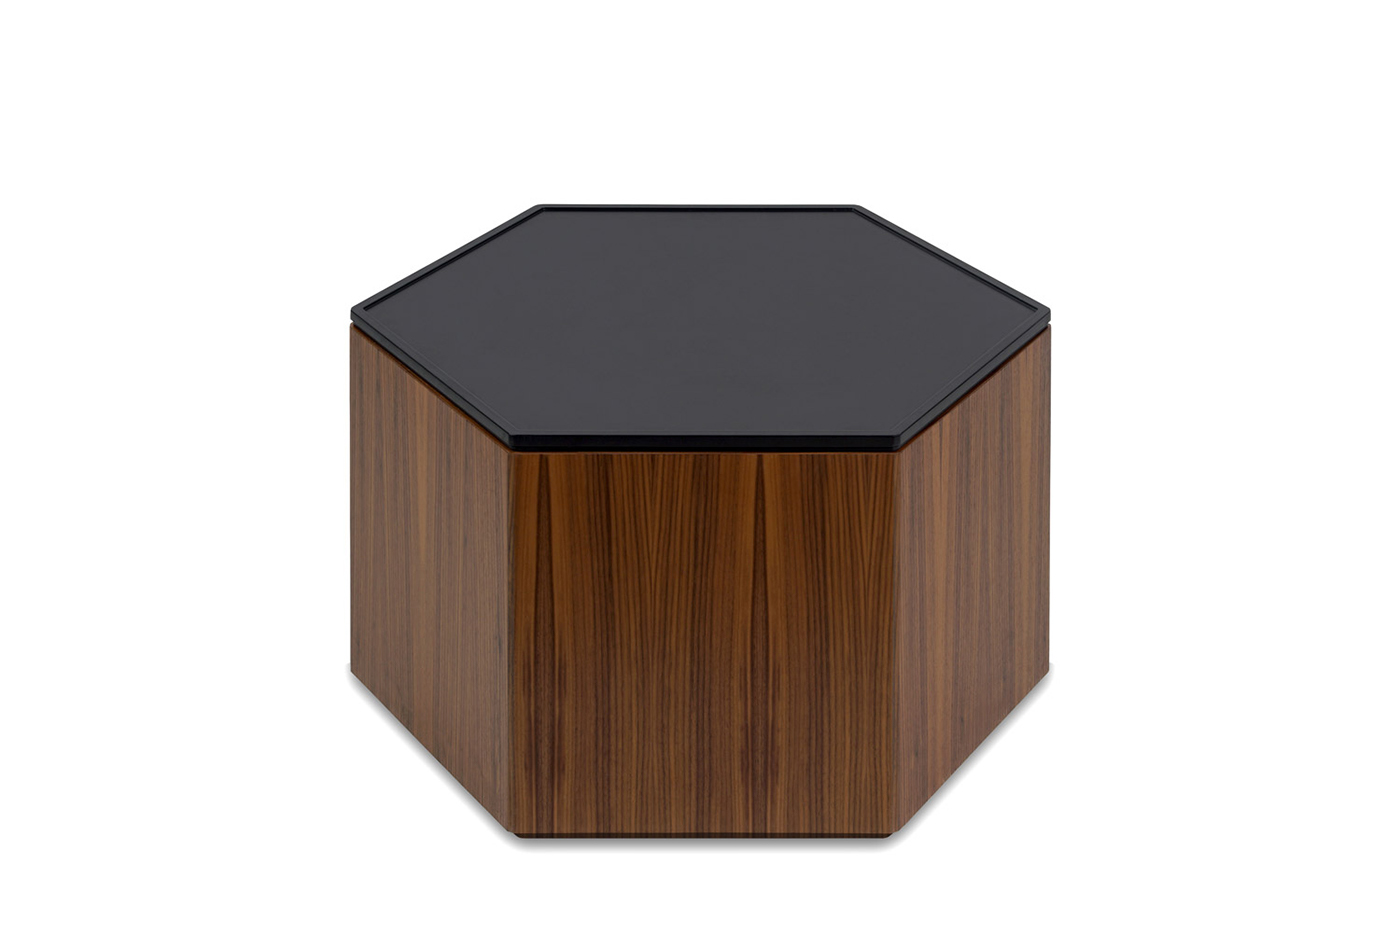 walnut black matte color wood plywood furniture design contemporary modern modular coffee table table Coffee living room